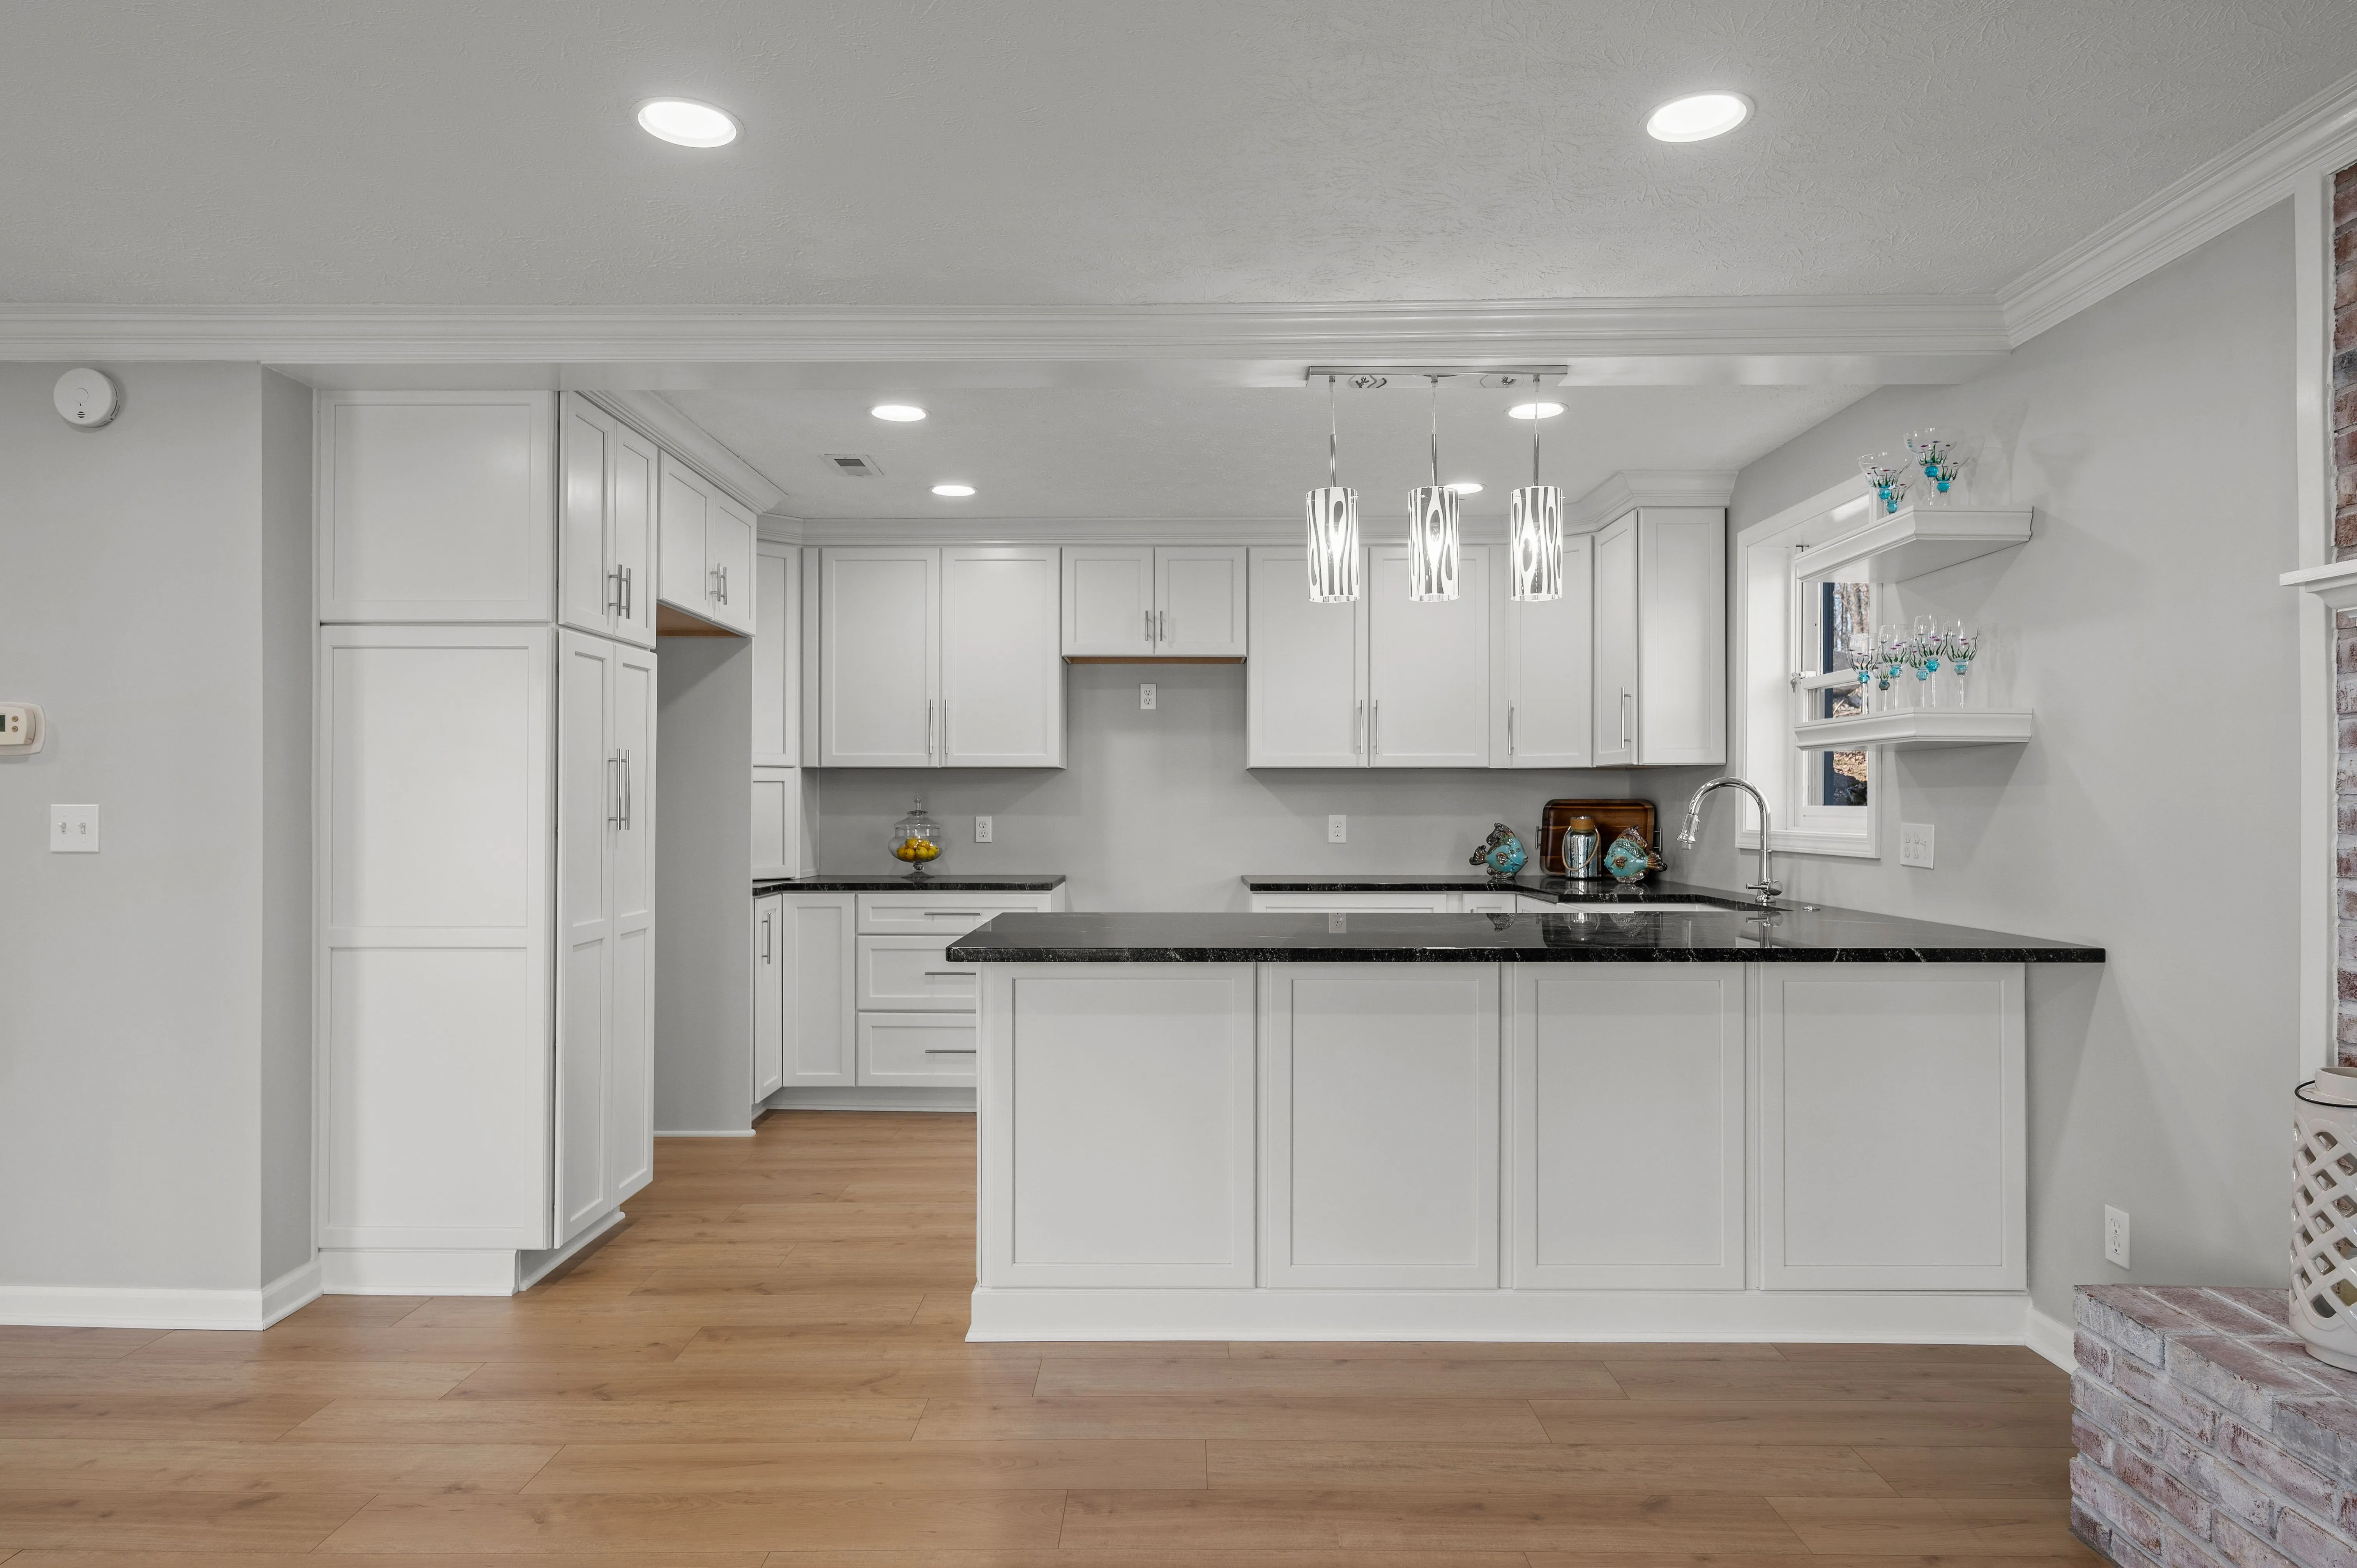 Modern kitchen interior with white cabinetry, black countertops, and hardwood floors.